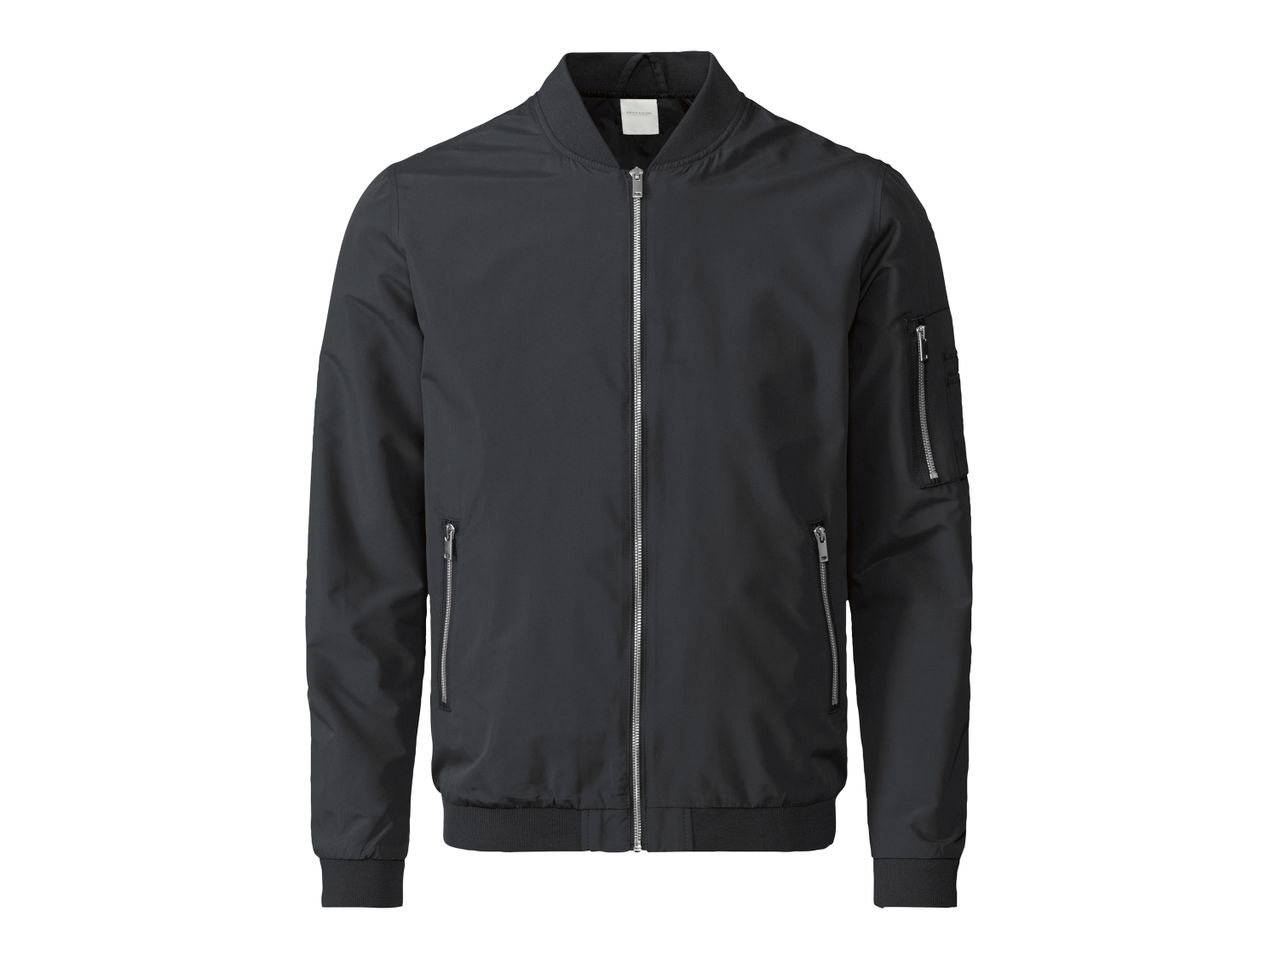 Go to full screen view: Men’s College Jacket - Image 1